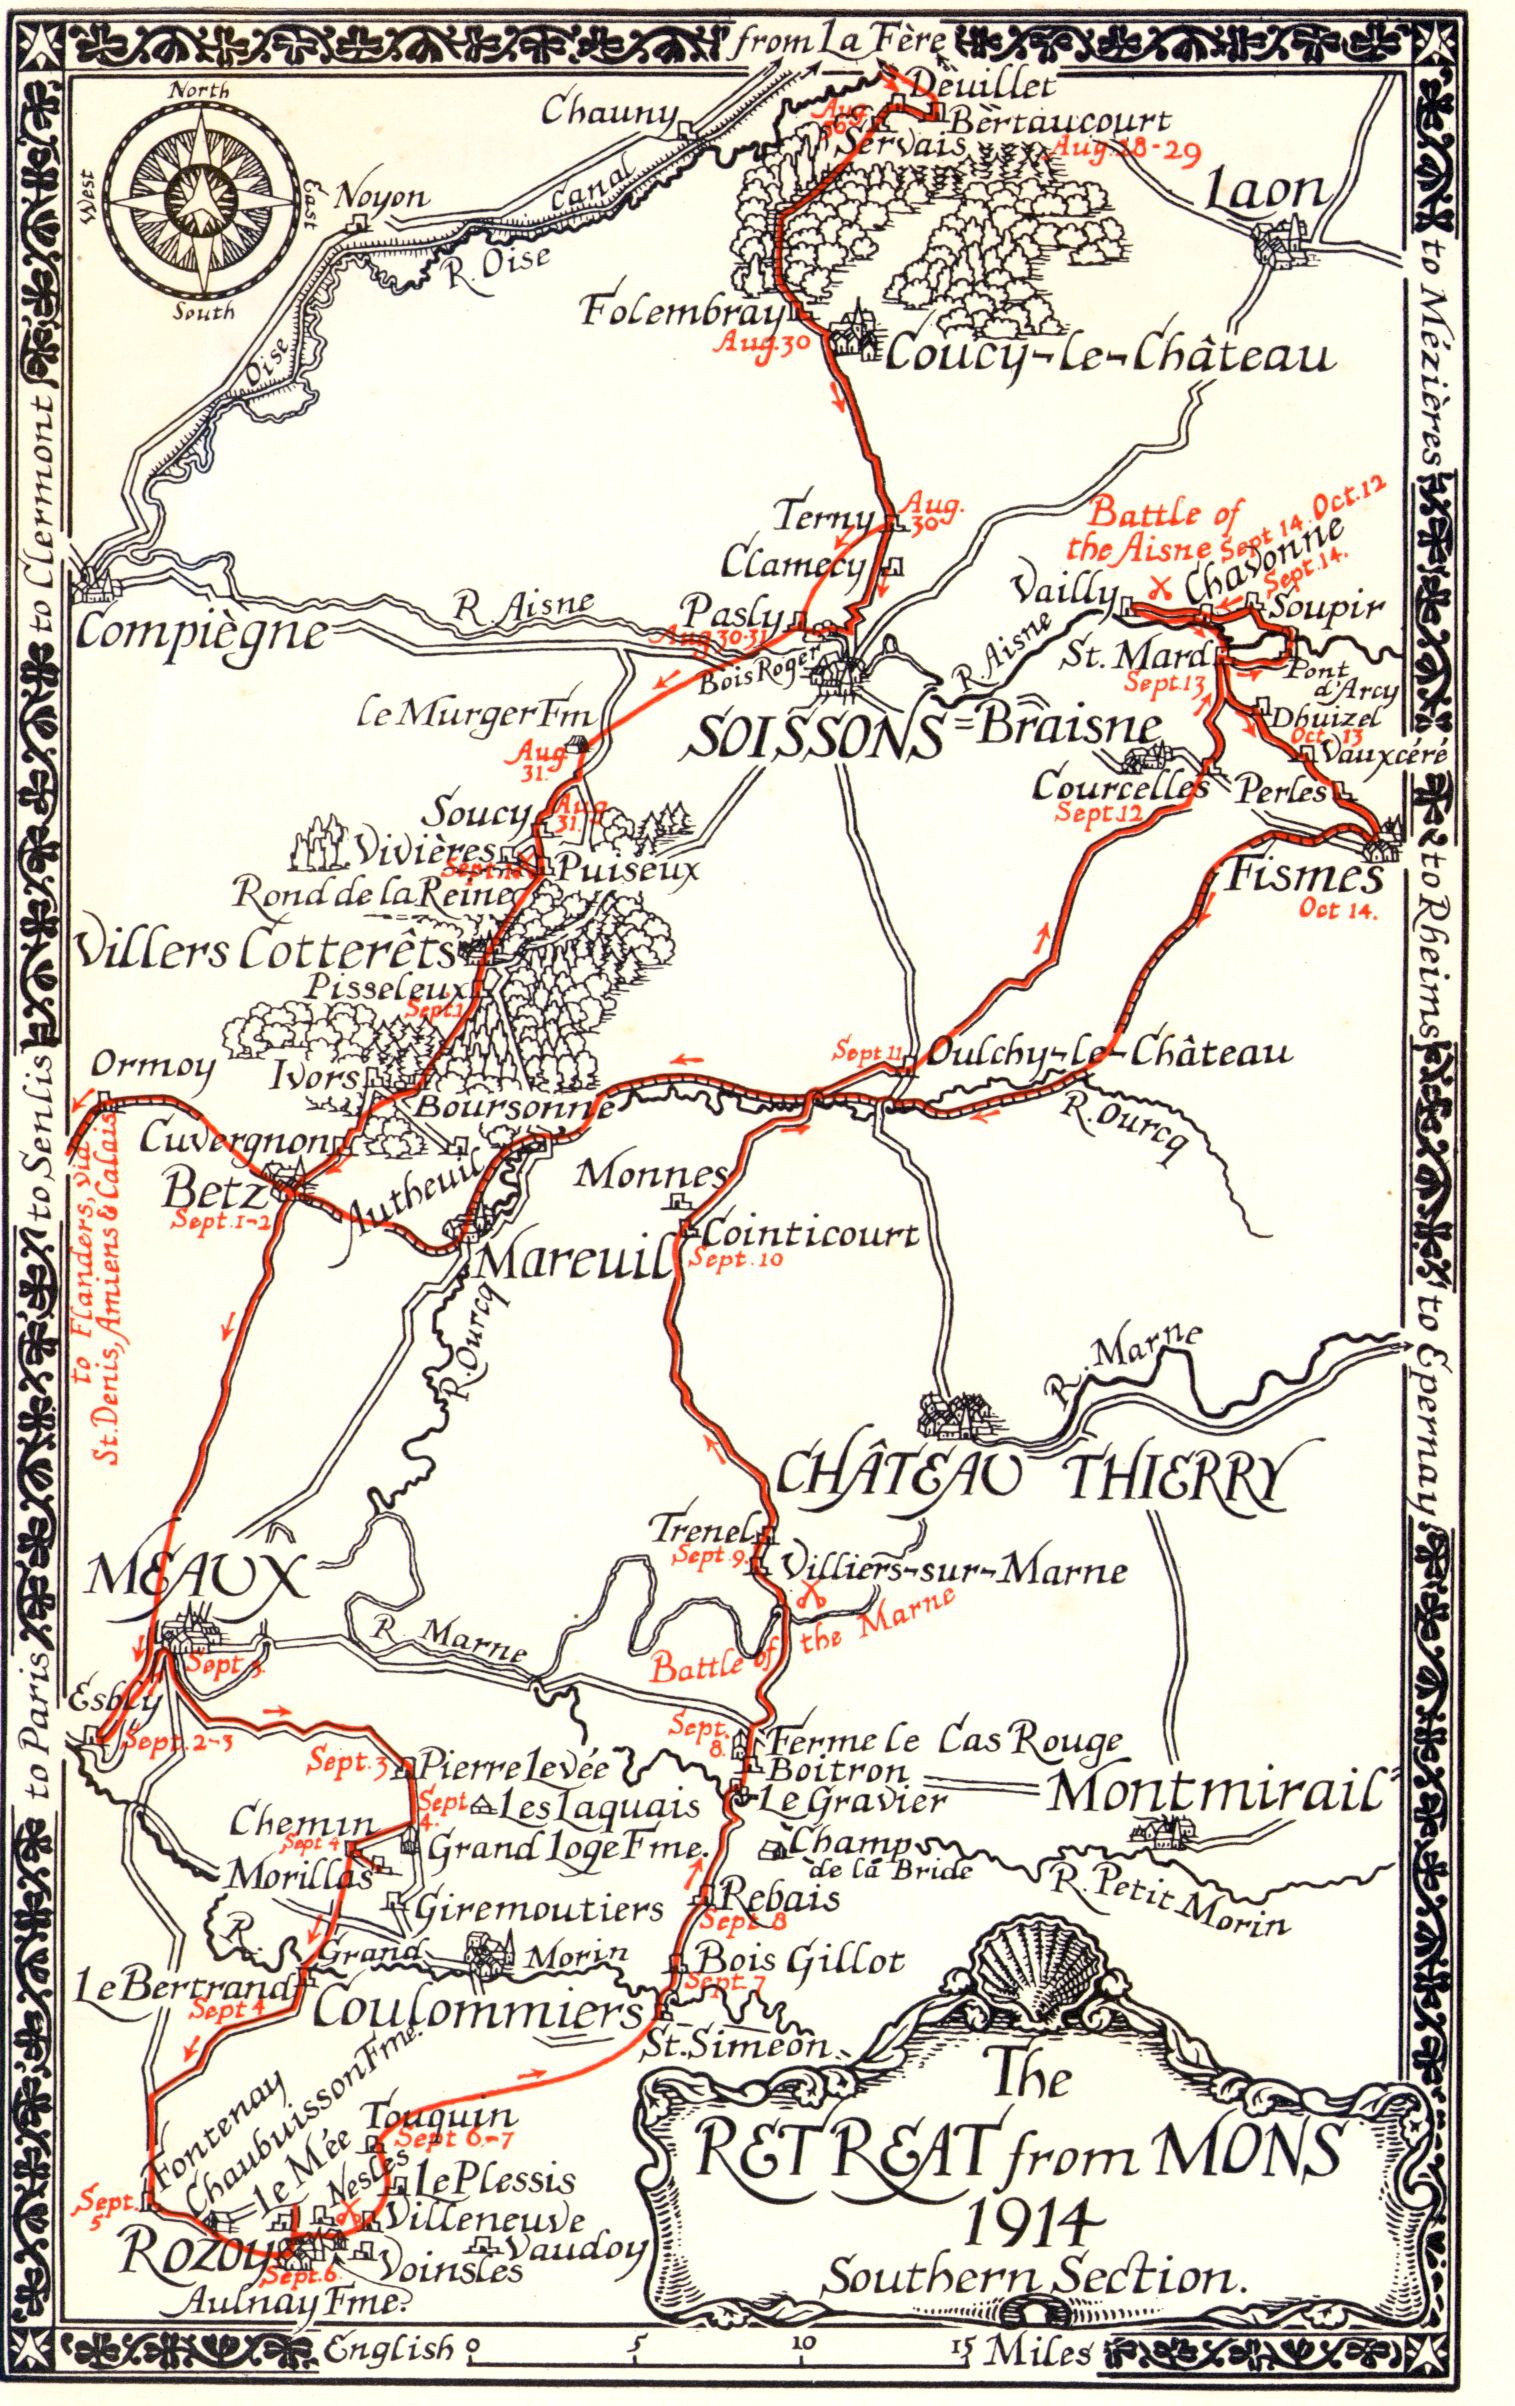 The Retreat from Mons, 1914. Southern Section